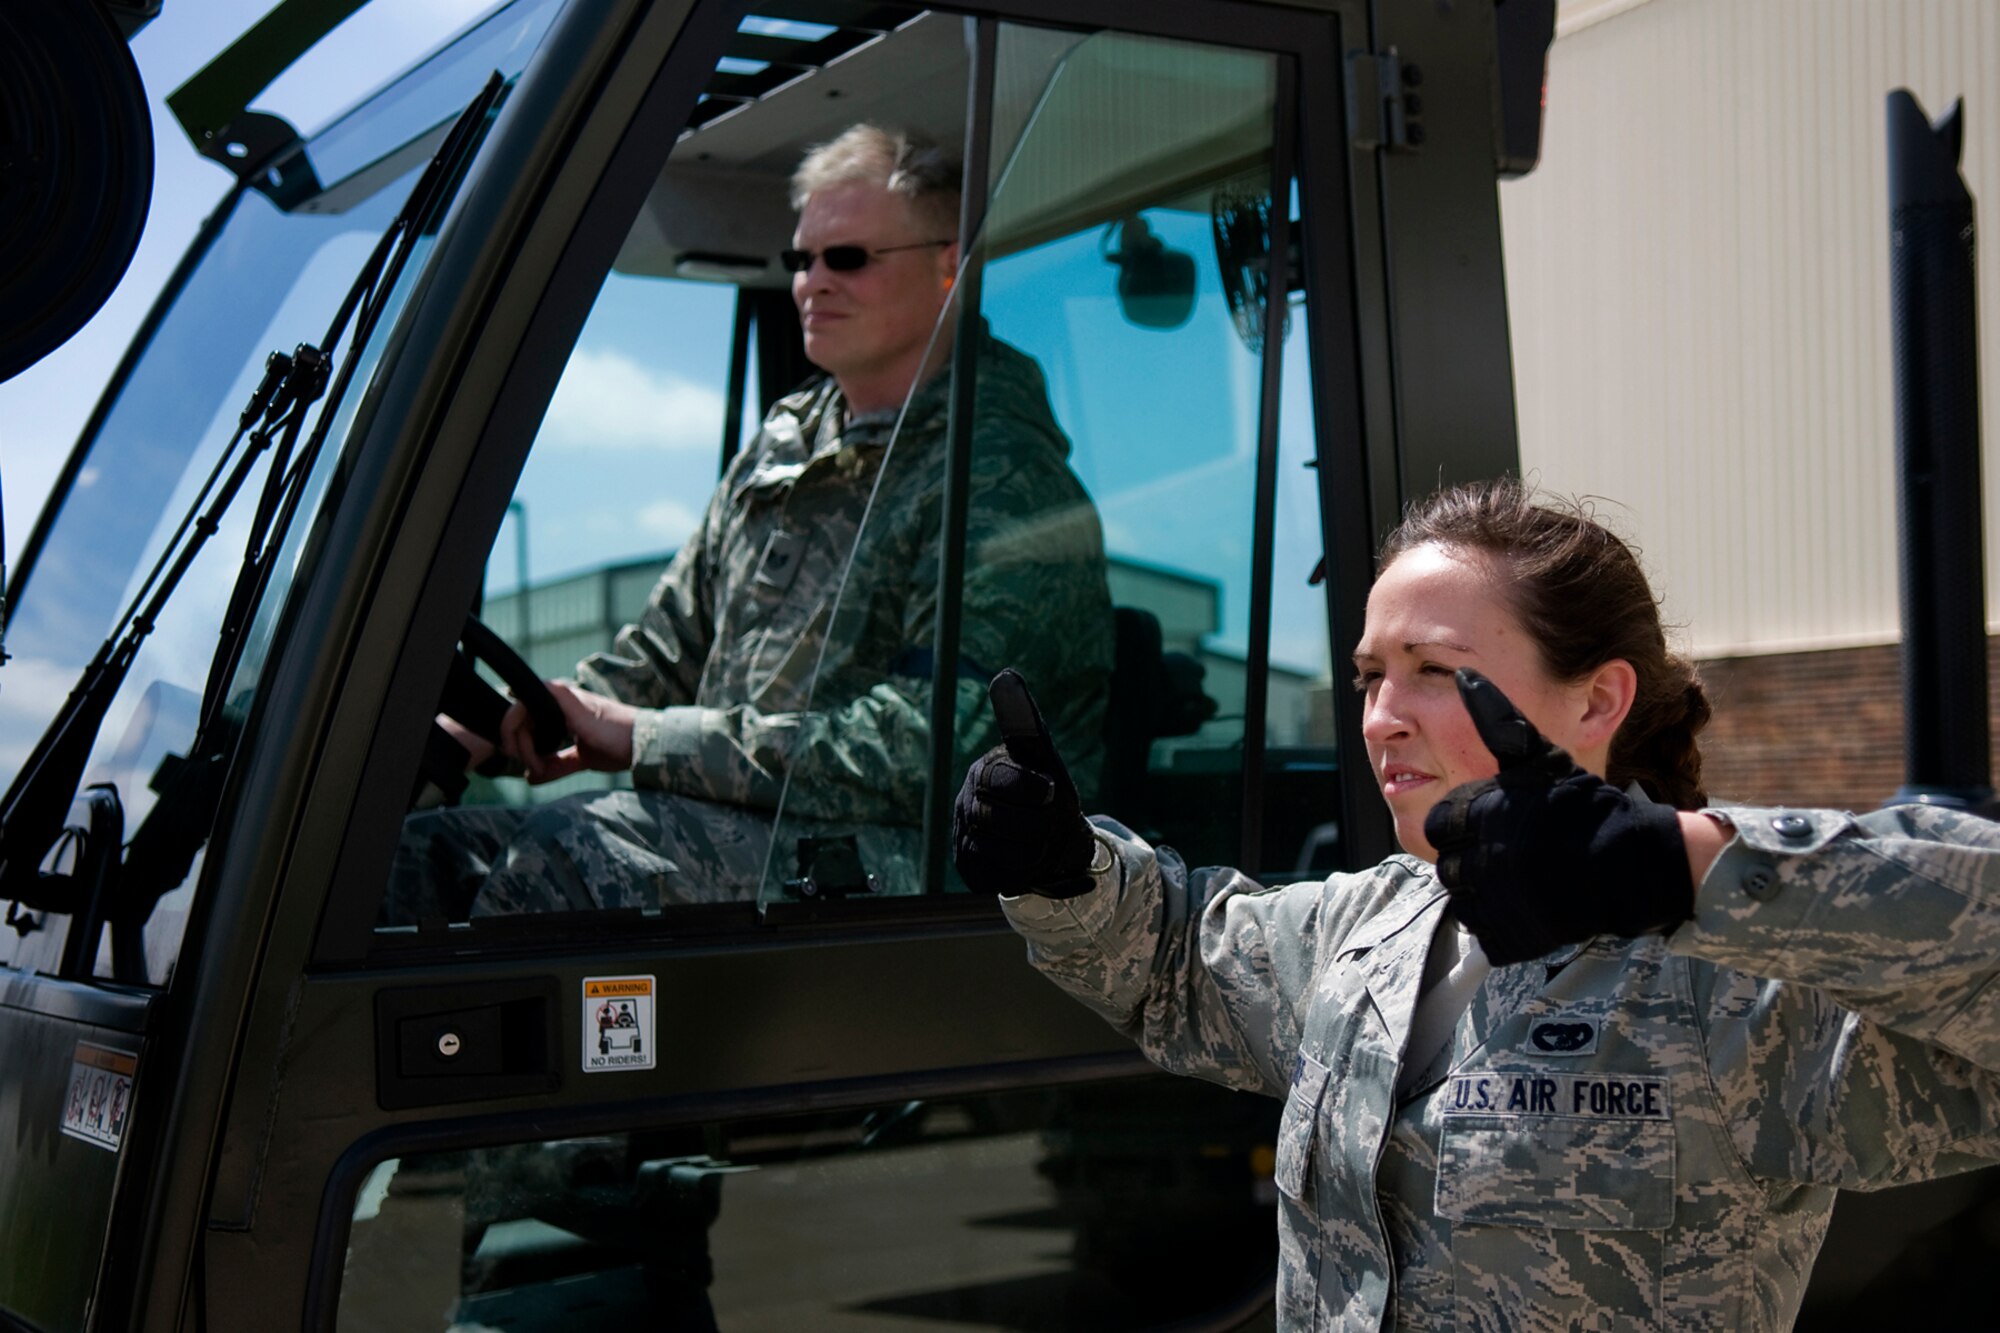 Senior Airman Mallory Cole, right, 81st Aerial Port Squadron aerial port specialist from Charleston Air Force Base, S.C., directs Staff Sgt. Steven Bourff, 49th Aerial Port Squadron aerial port specialist from Grissom Air Reserve Base, Ind., as Bourff controls a 10K standard forklift being used to load the cargo at Grissom April 25, 2014, during a Patriot Warrior exercise. Patriot Warrior is a joint, field-training exercise for theater aeromedical evacuation systems and ground medical components designed to replicate all aspects of combat medical service support. (U.S. Air Force photo/Tech. Sgt. Mark R. W. Orders-Woempner)
